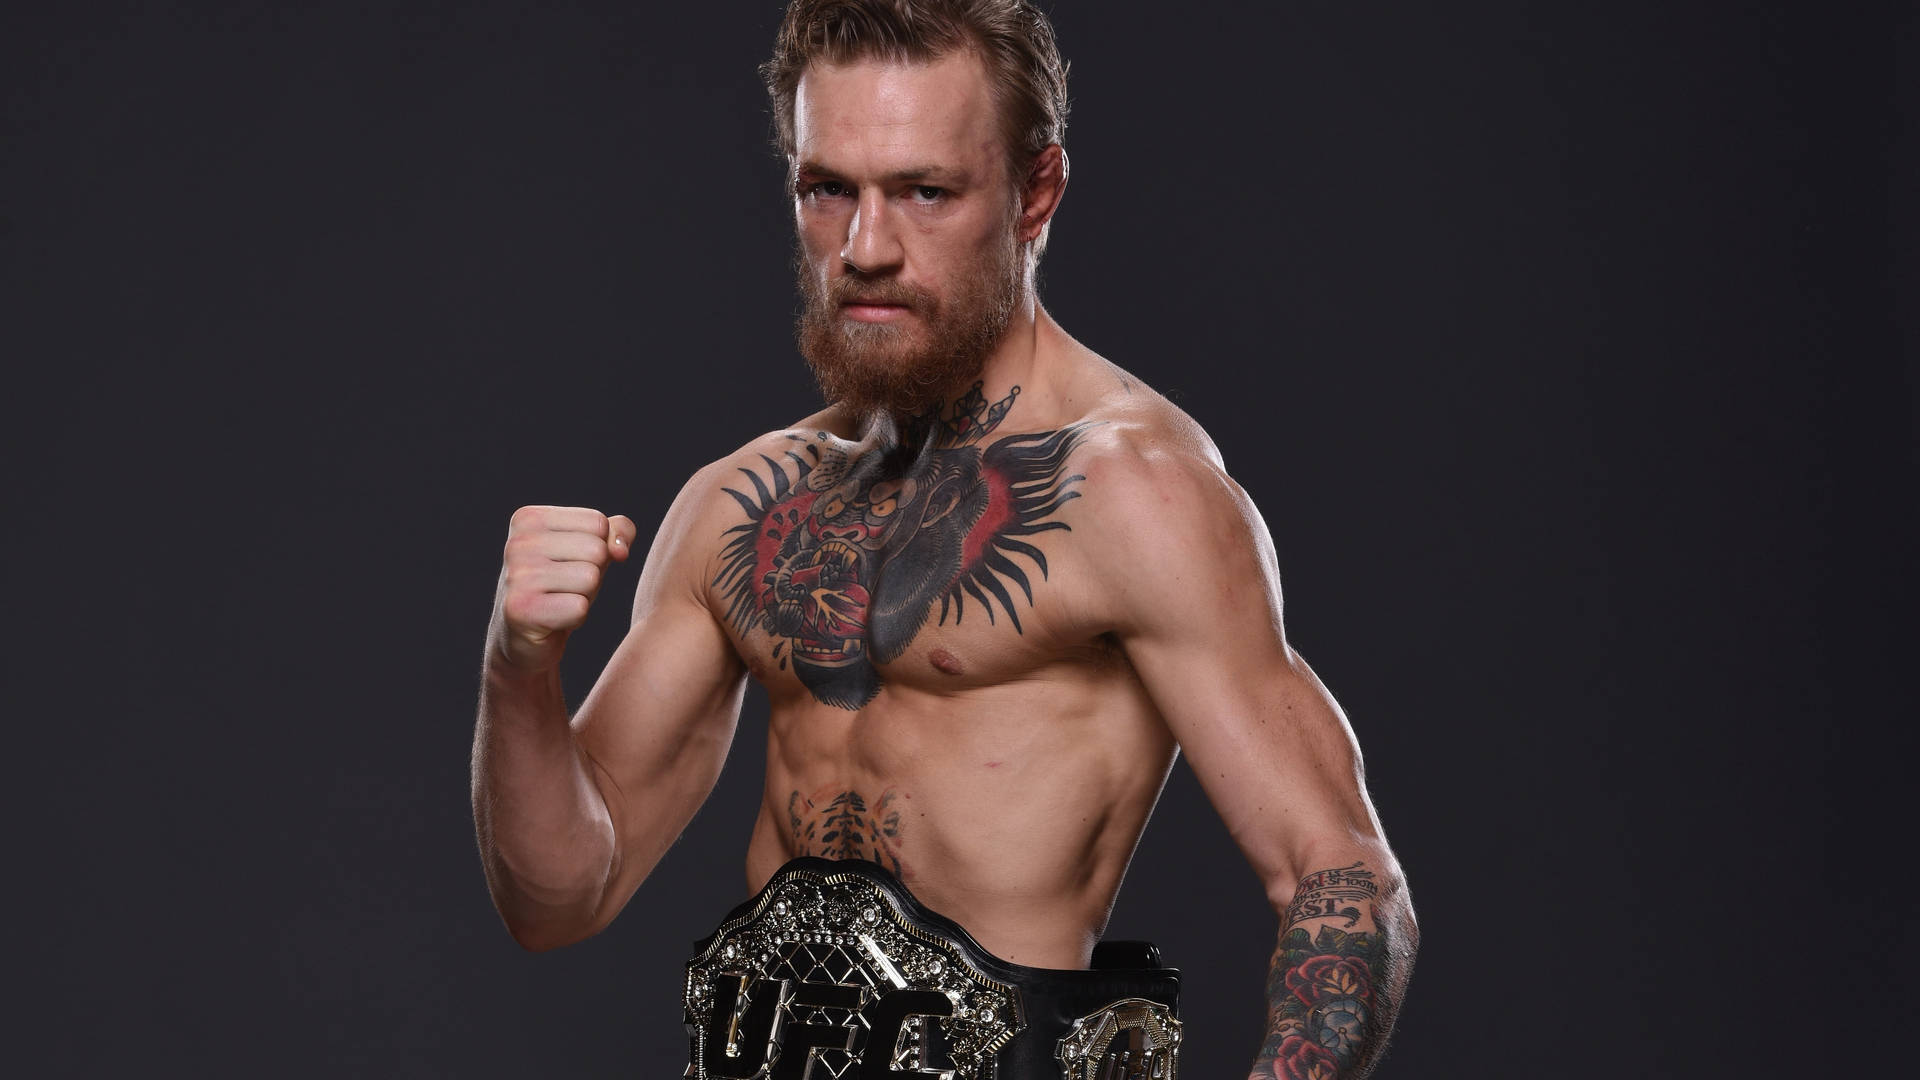 Conor Mcgregor 2560X1440 Wallpaper and Background Image